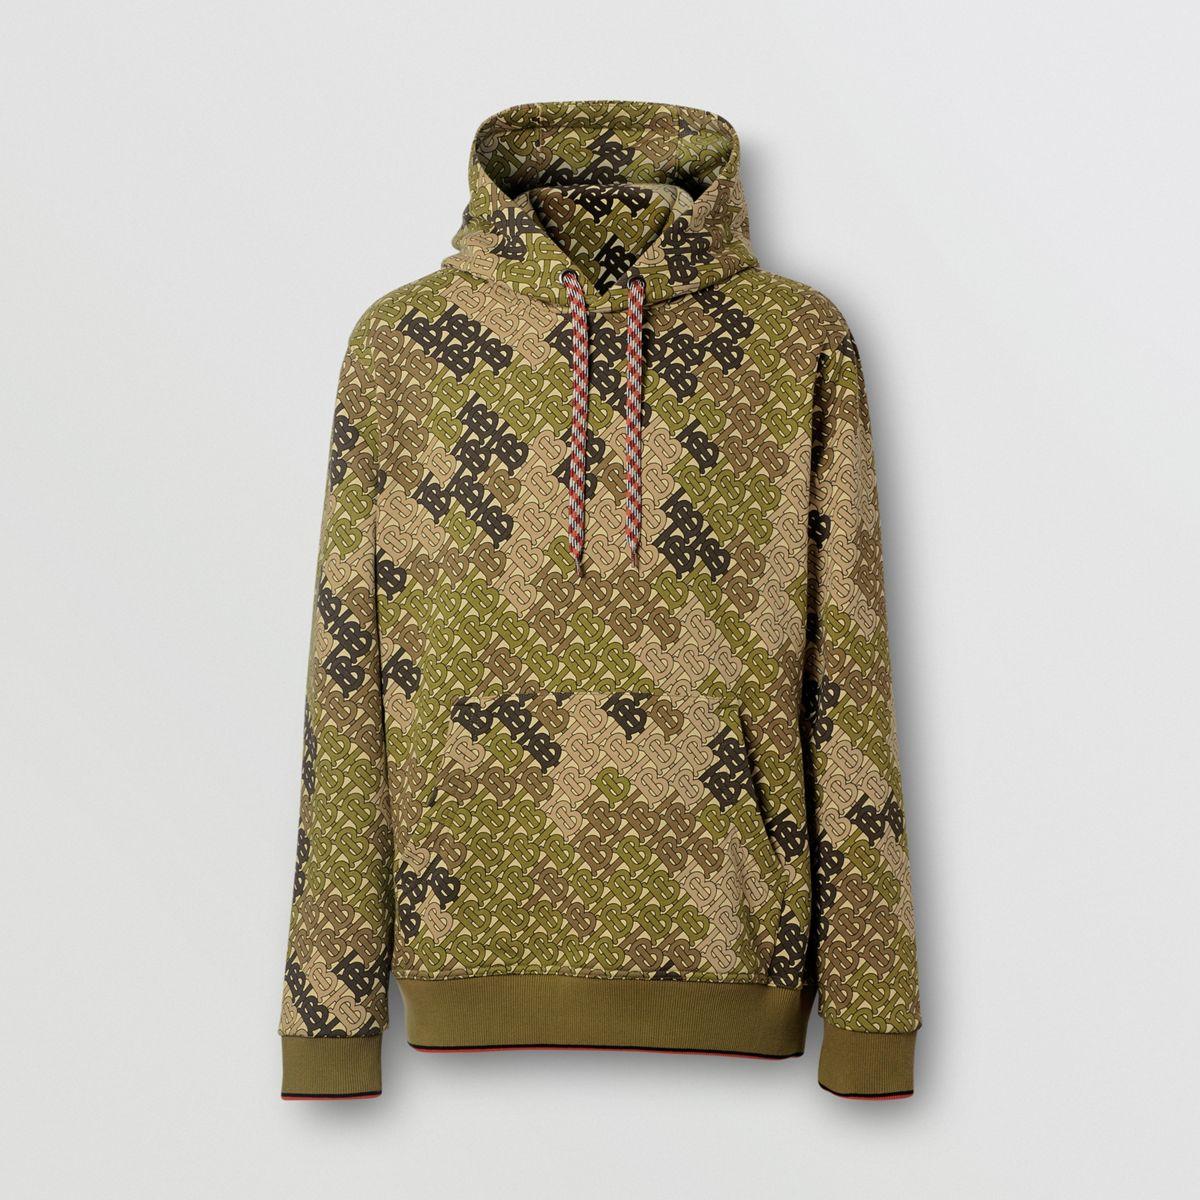 Burberry Monogram Print Cotton Hoodie in Army Green (Green) for Men - Lyst